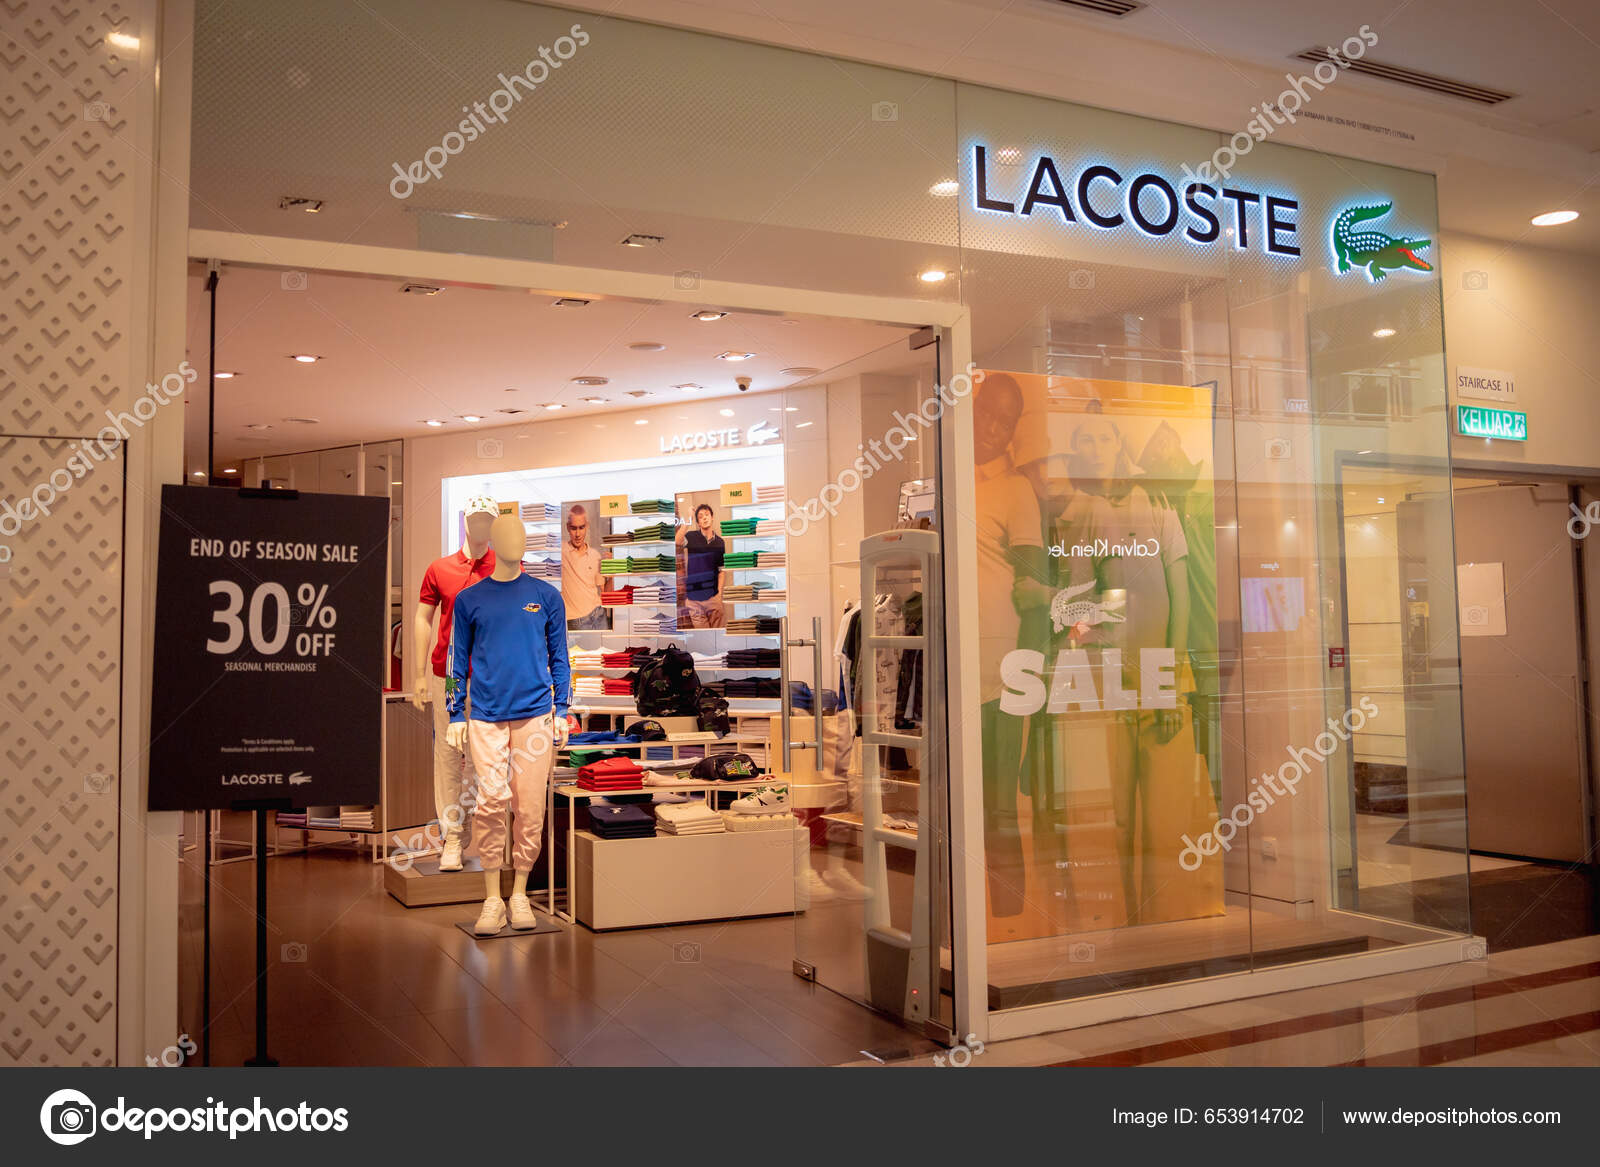 Lacoste outlet Stock Photos, Royalty Free Lacoste outlet Images |  Depositphotos